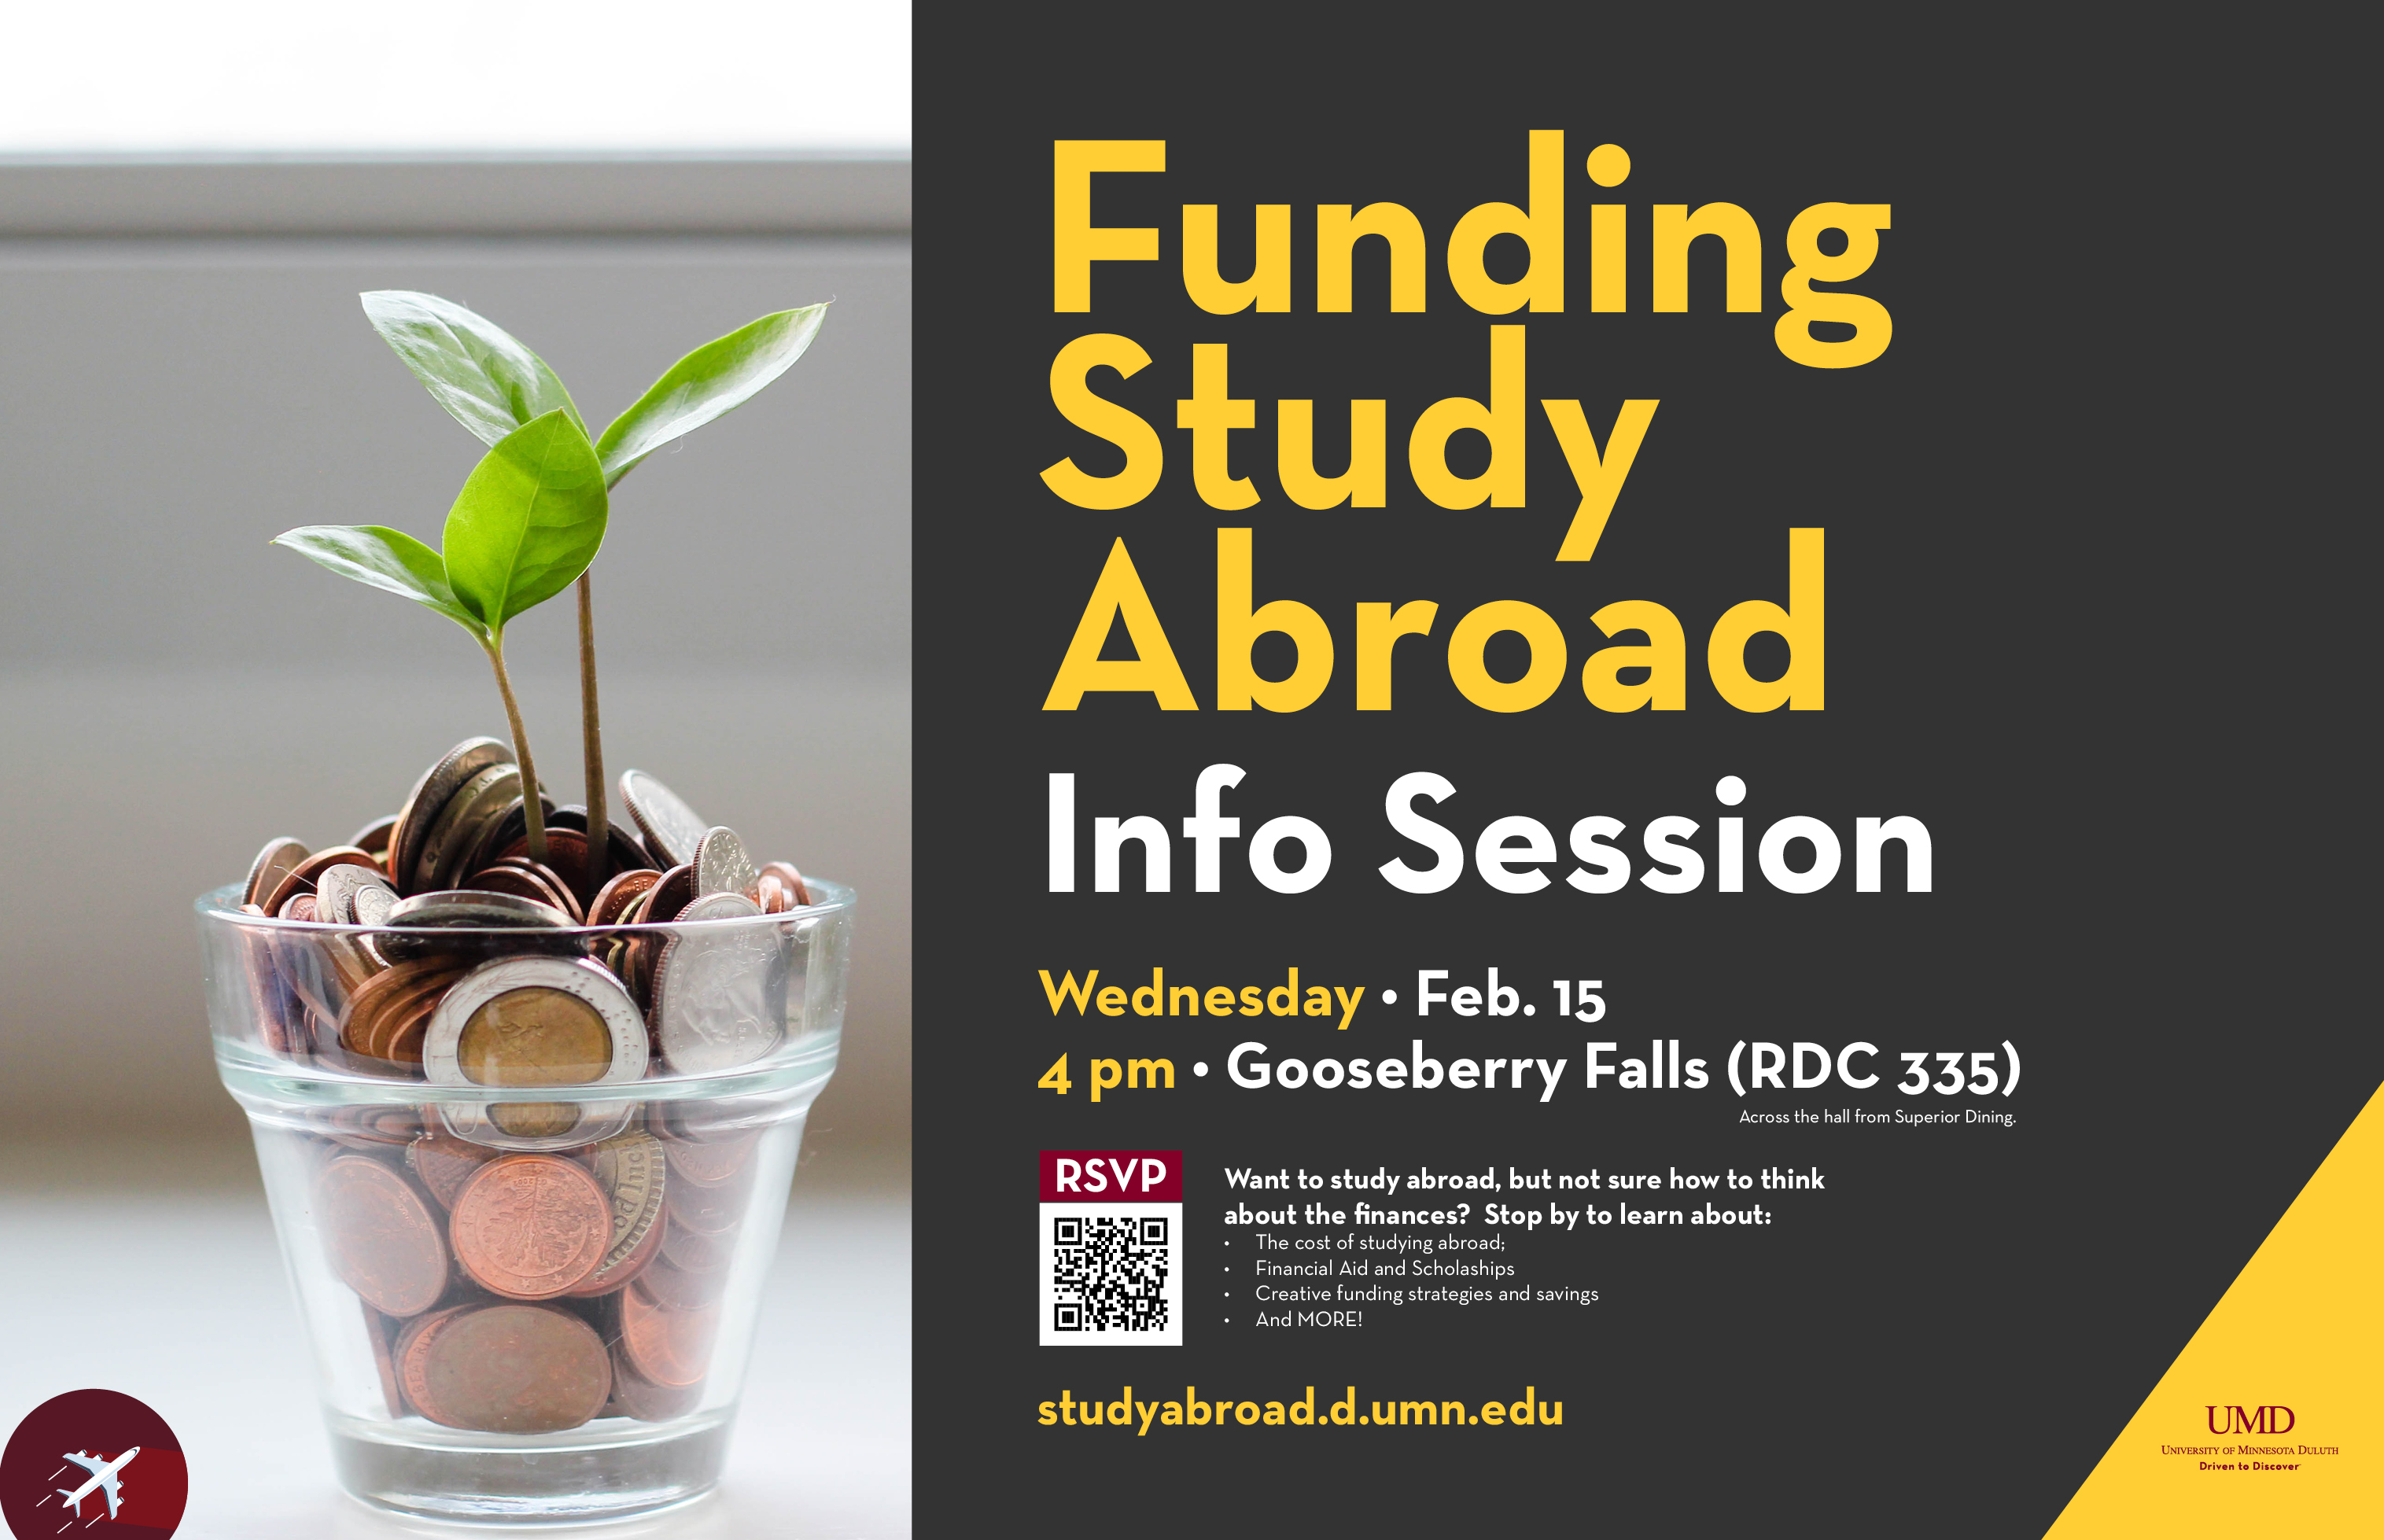 Study abroad graphic that has a plant and advertises a study abroad info session